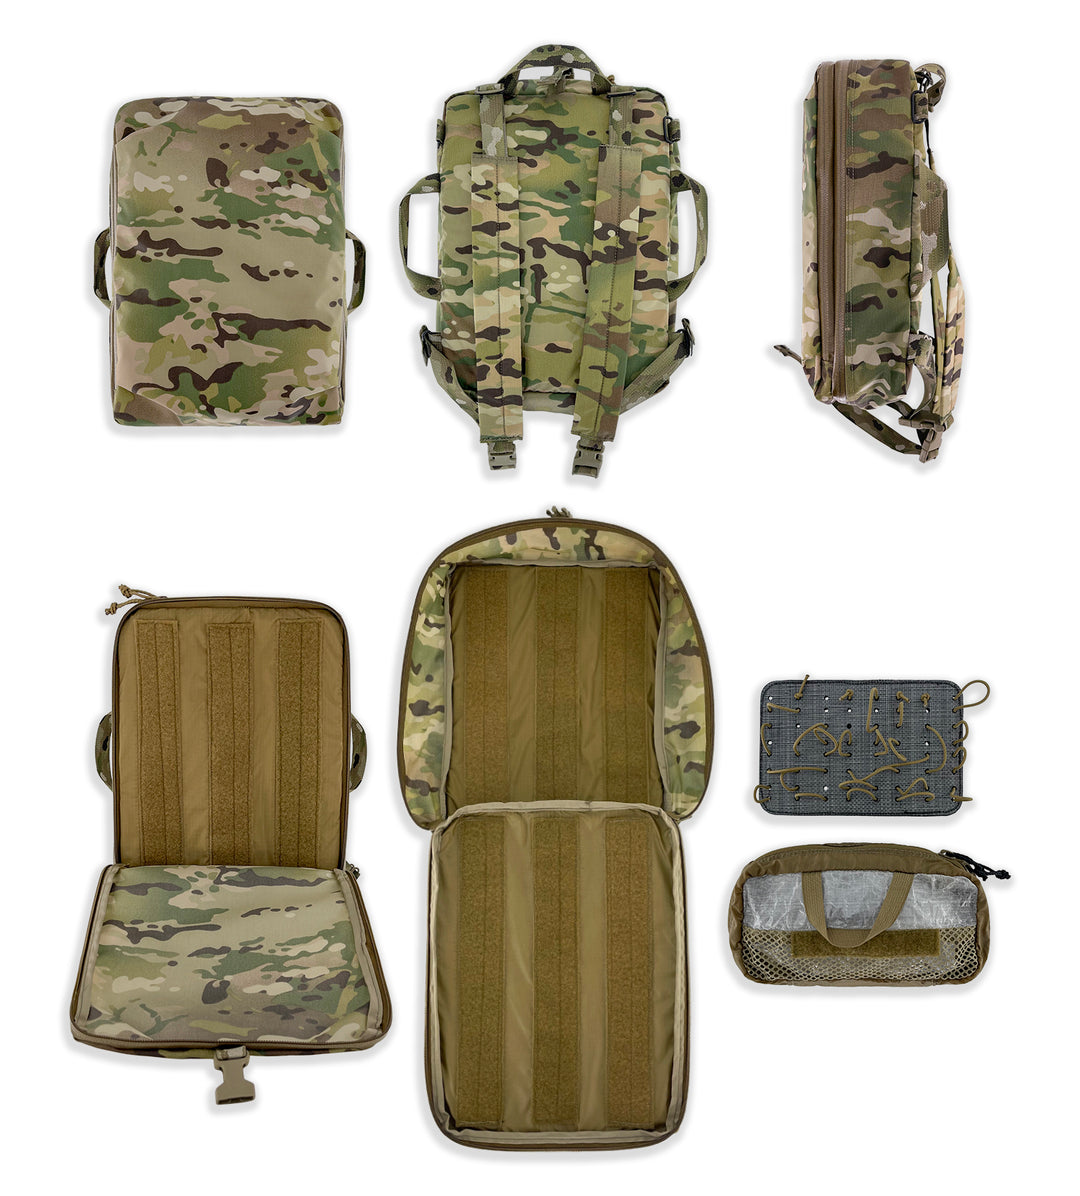 Introducing the S.O.Tech Micro Pack